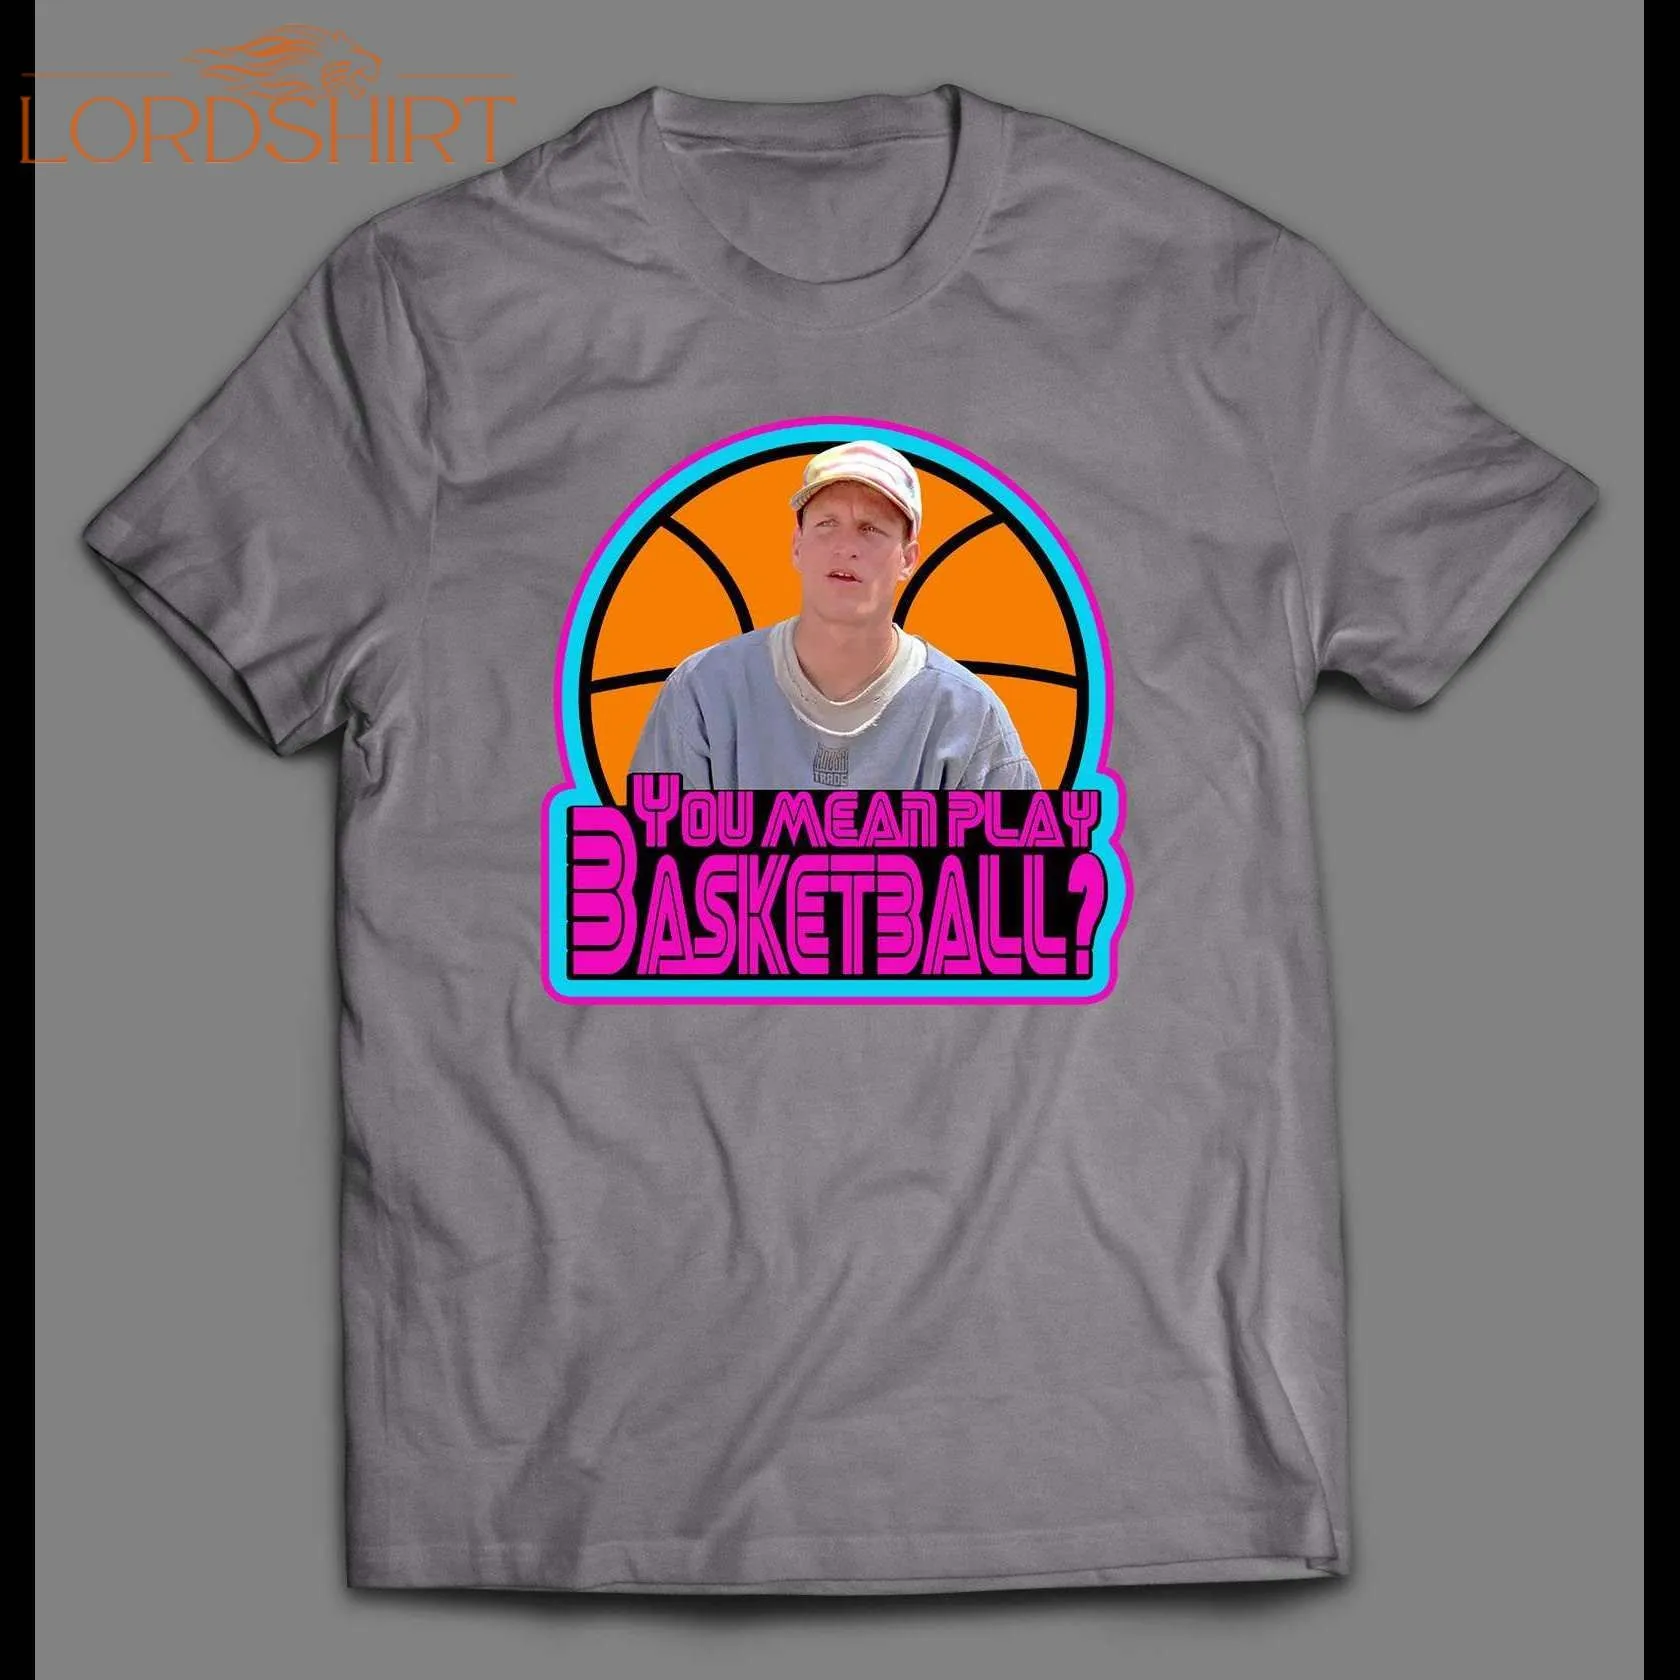 White Men Can't Jump Billy Hoyle You Mean Play Basketball Shirt